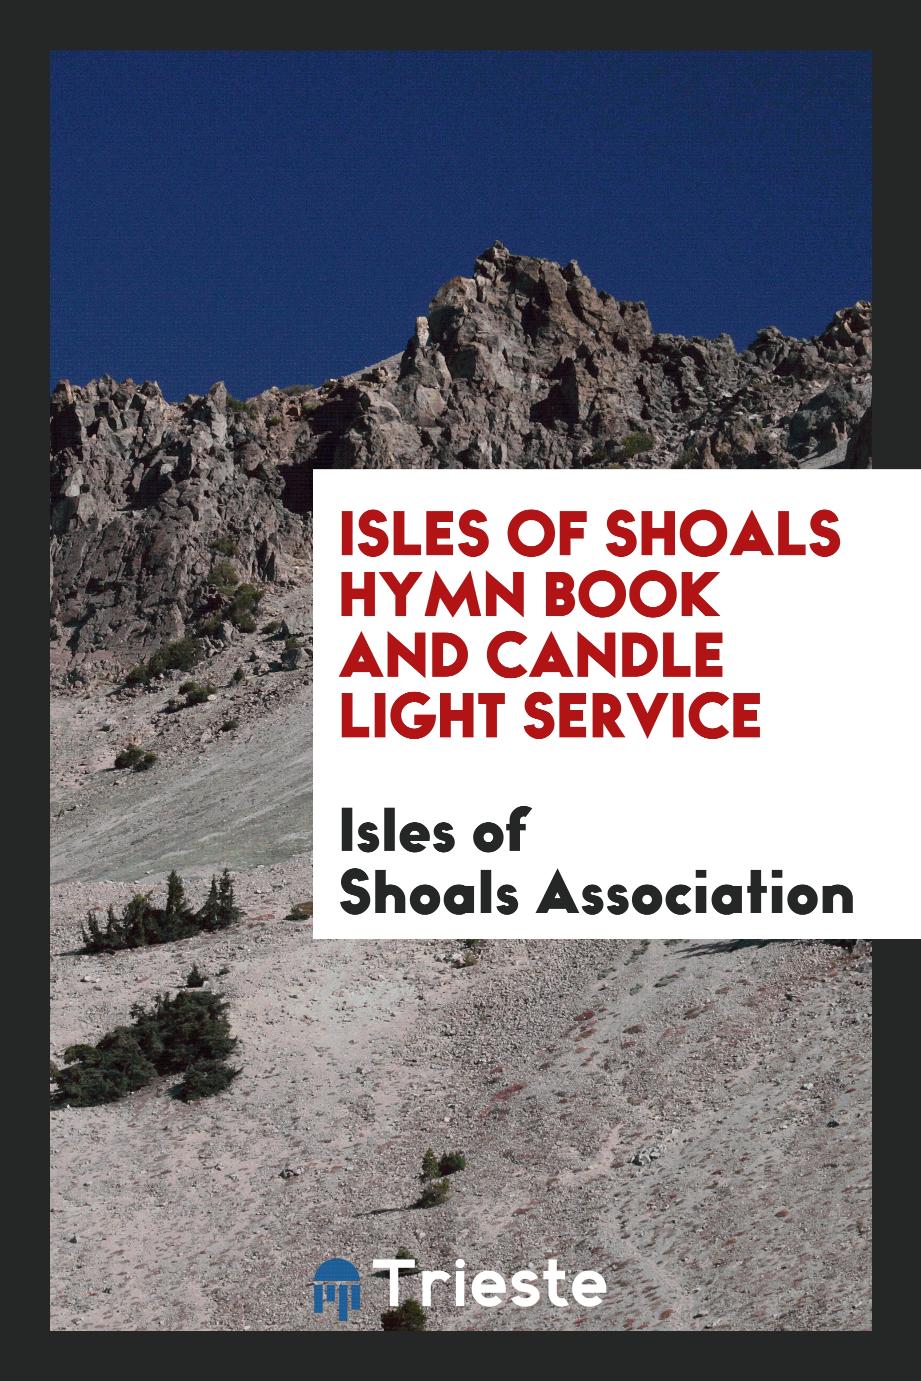 Isles of Shoals Hymn Book and Candle Light Service